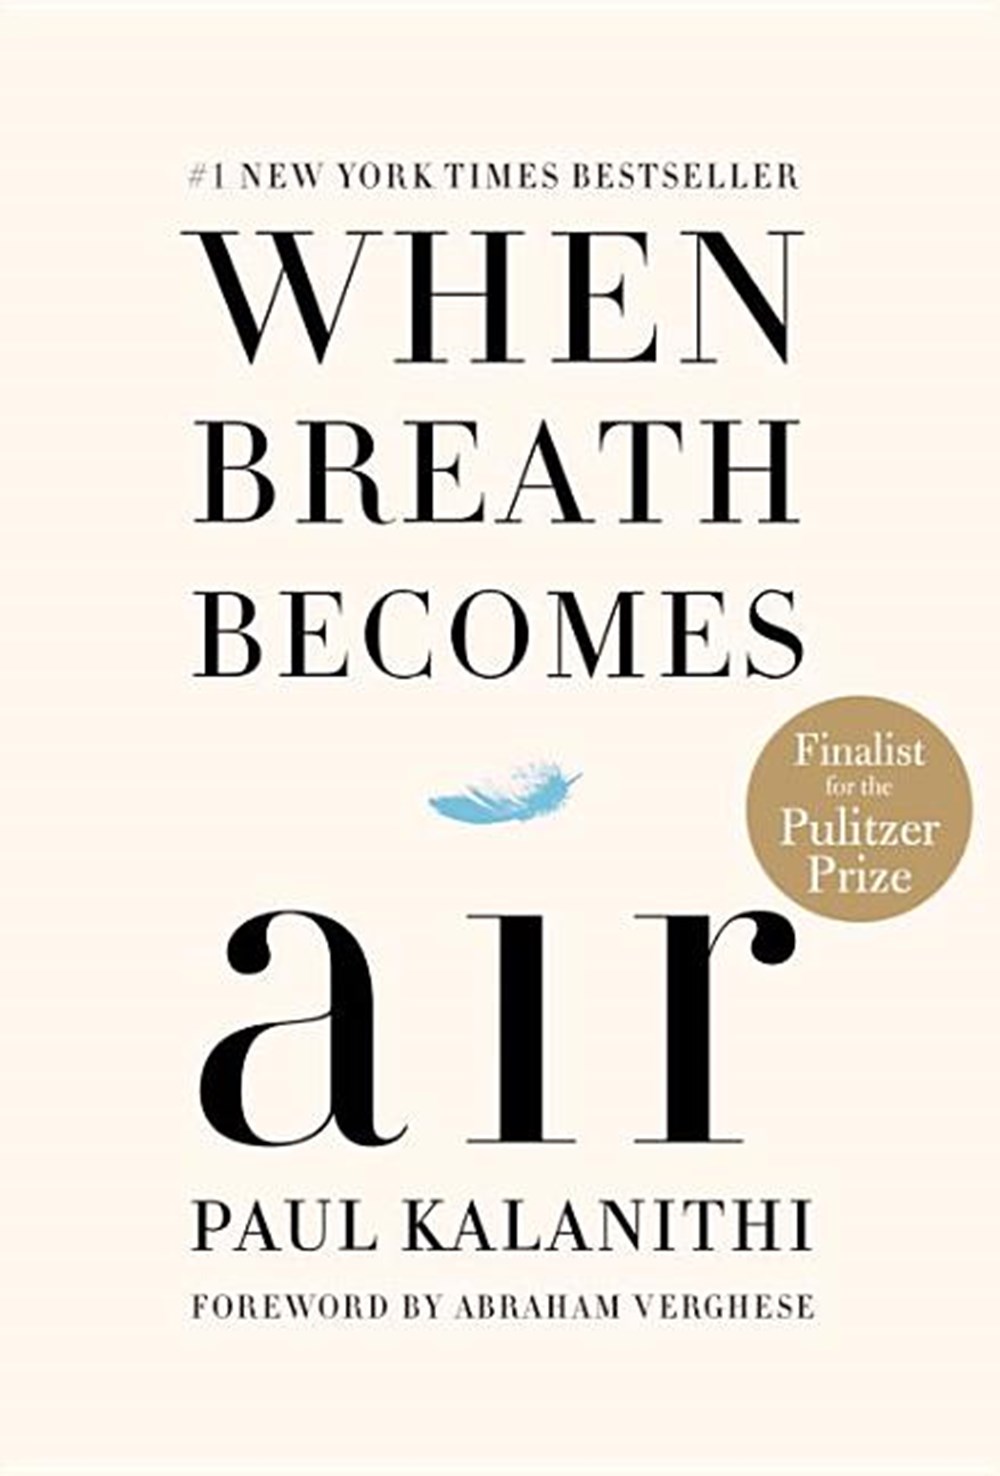 book review of when breath becomes air